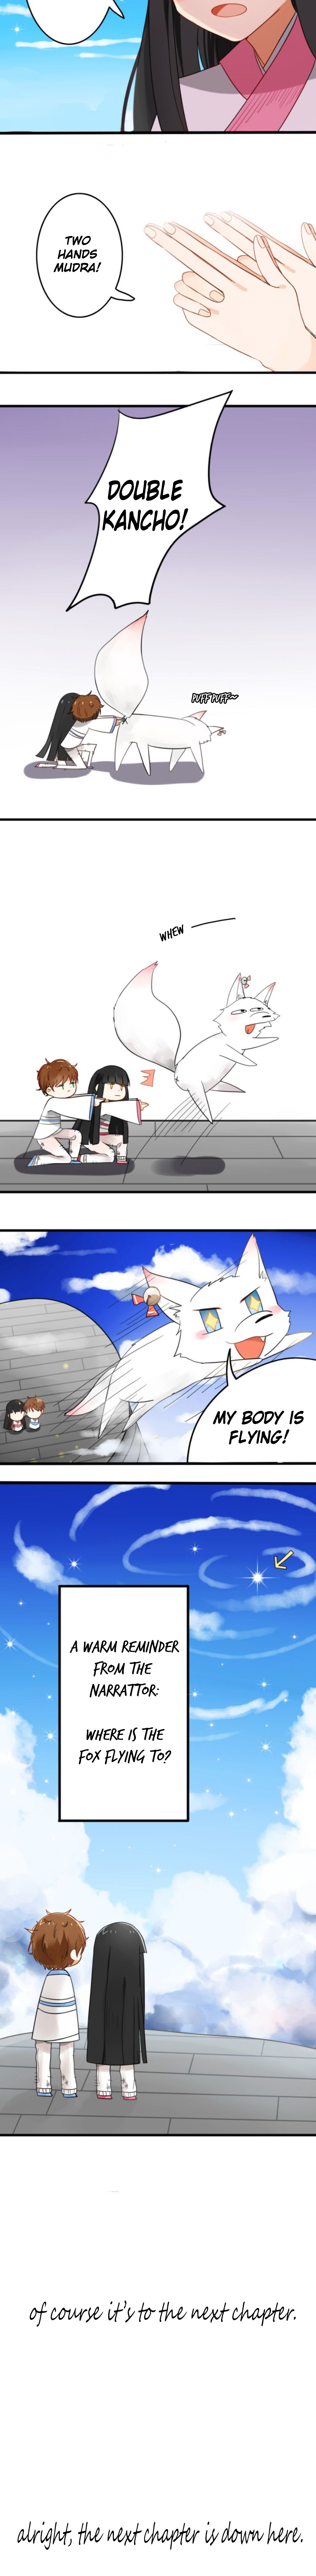 My Pet Lost Her Memories Ch. 2 The Fox Is Finally Awake part 2